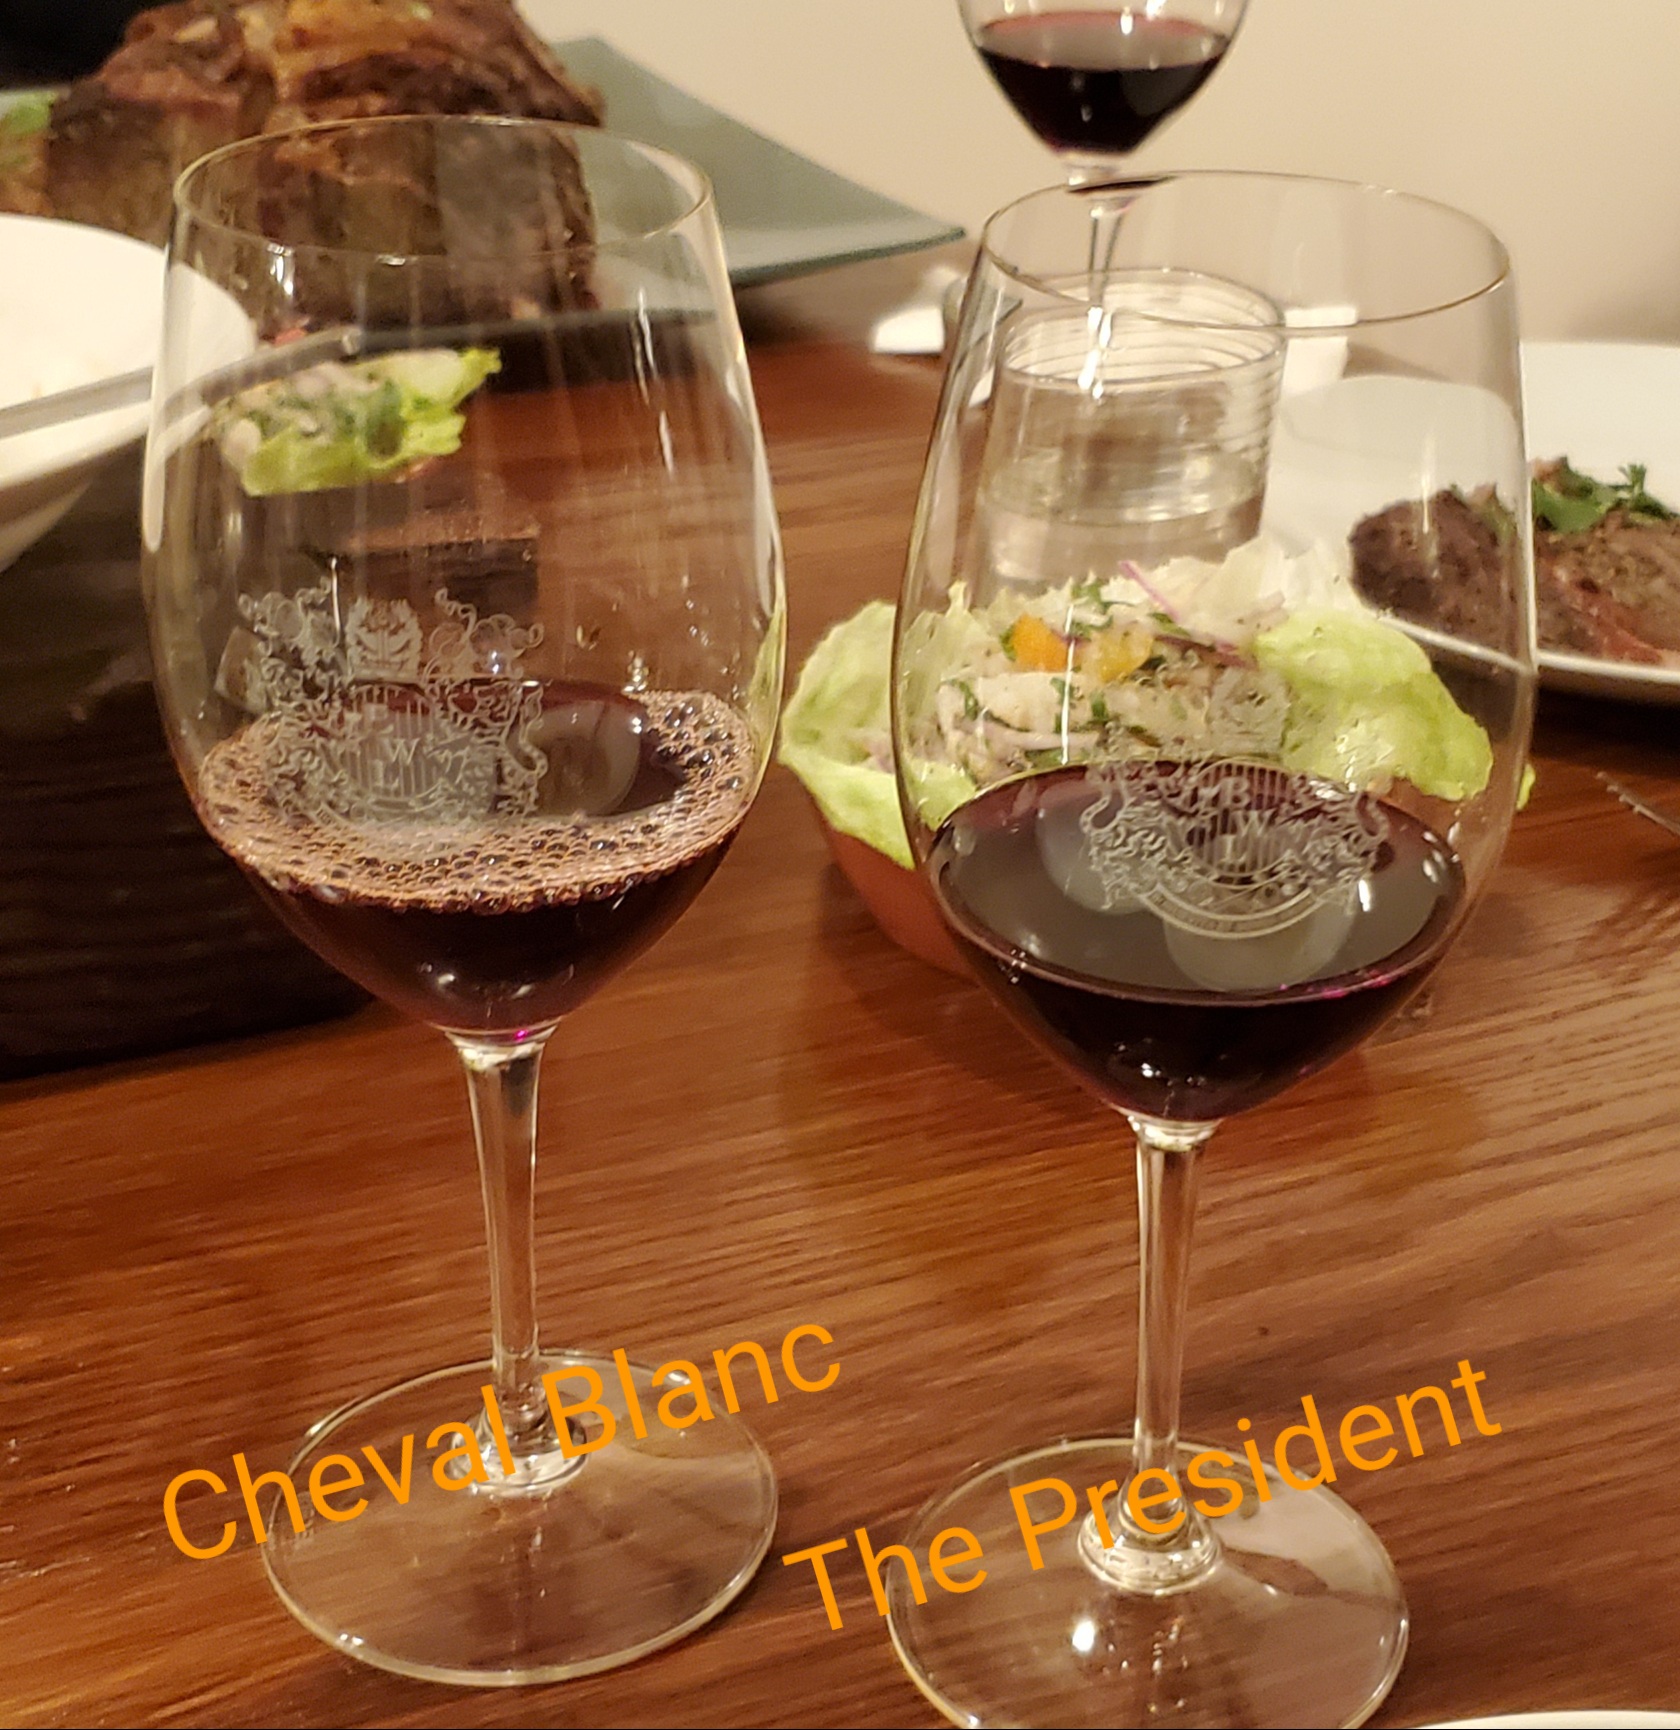 The President iconic wine by Blackwood Lane Winery 